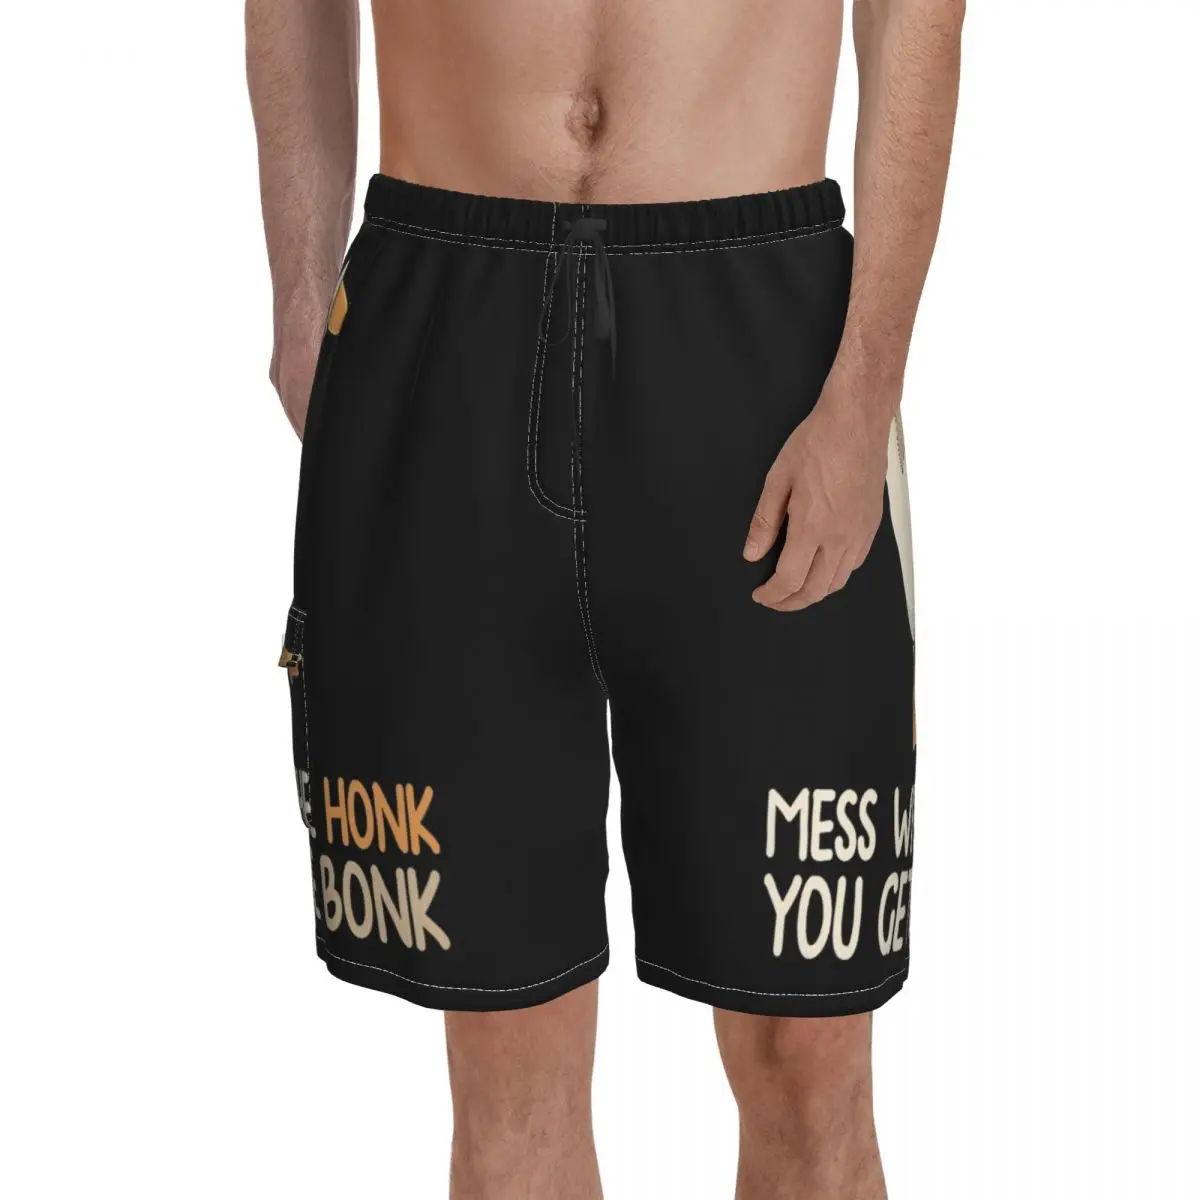 

You Get The Bonk Board Shorts Untitled Goose Game gaming animal Male Classic Beach Shorts Hot Customs Oversize Swim Trunks